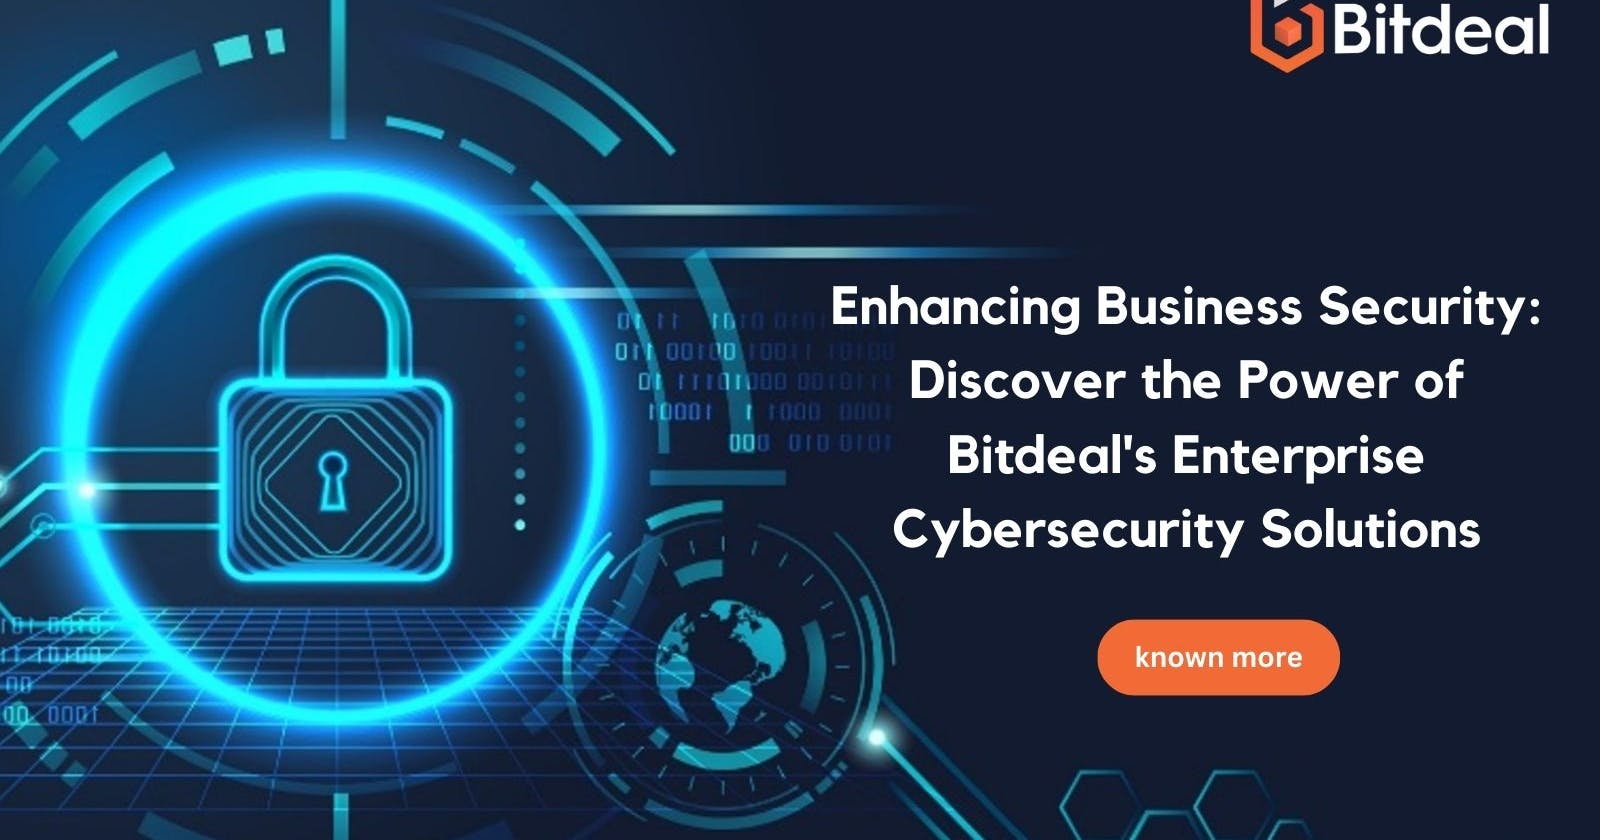 Enhancing Business Security: Discover the Power of Bitdeal's Enterprise Cybersecurity Solutions